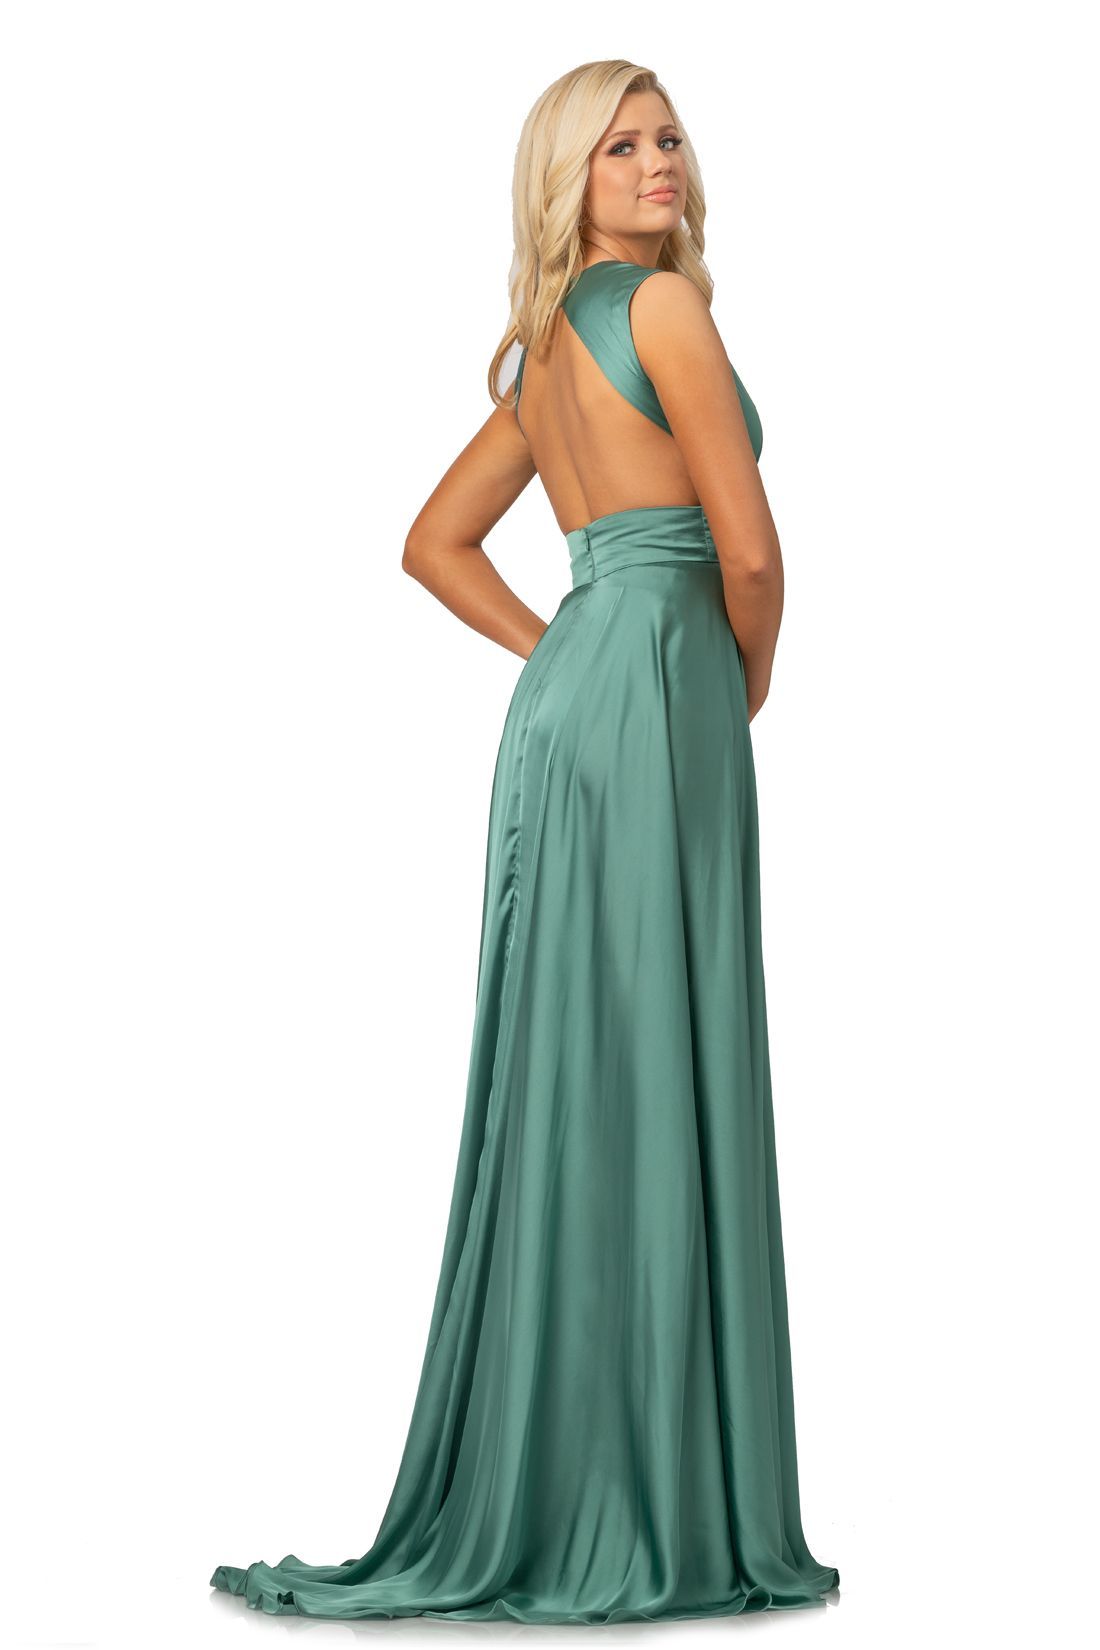 Johnathan Kayne Pageant Dress 8072 Prom Dress Formal Evening Wear Gown! Jade green high neckline double slit long evening gown 